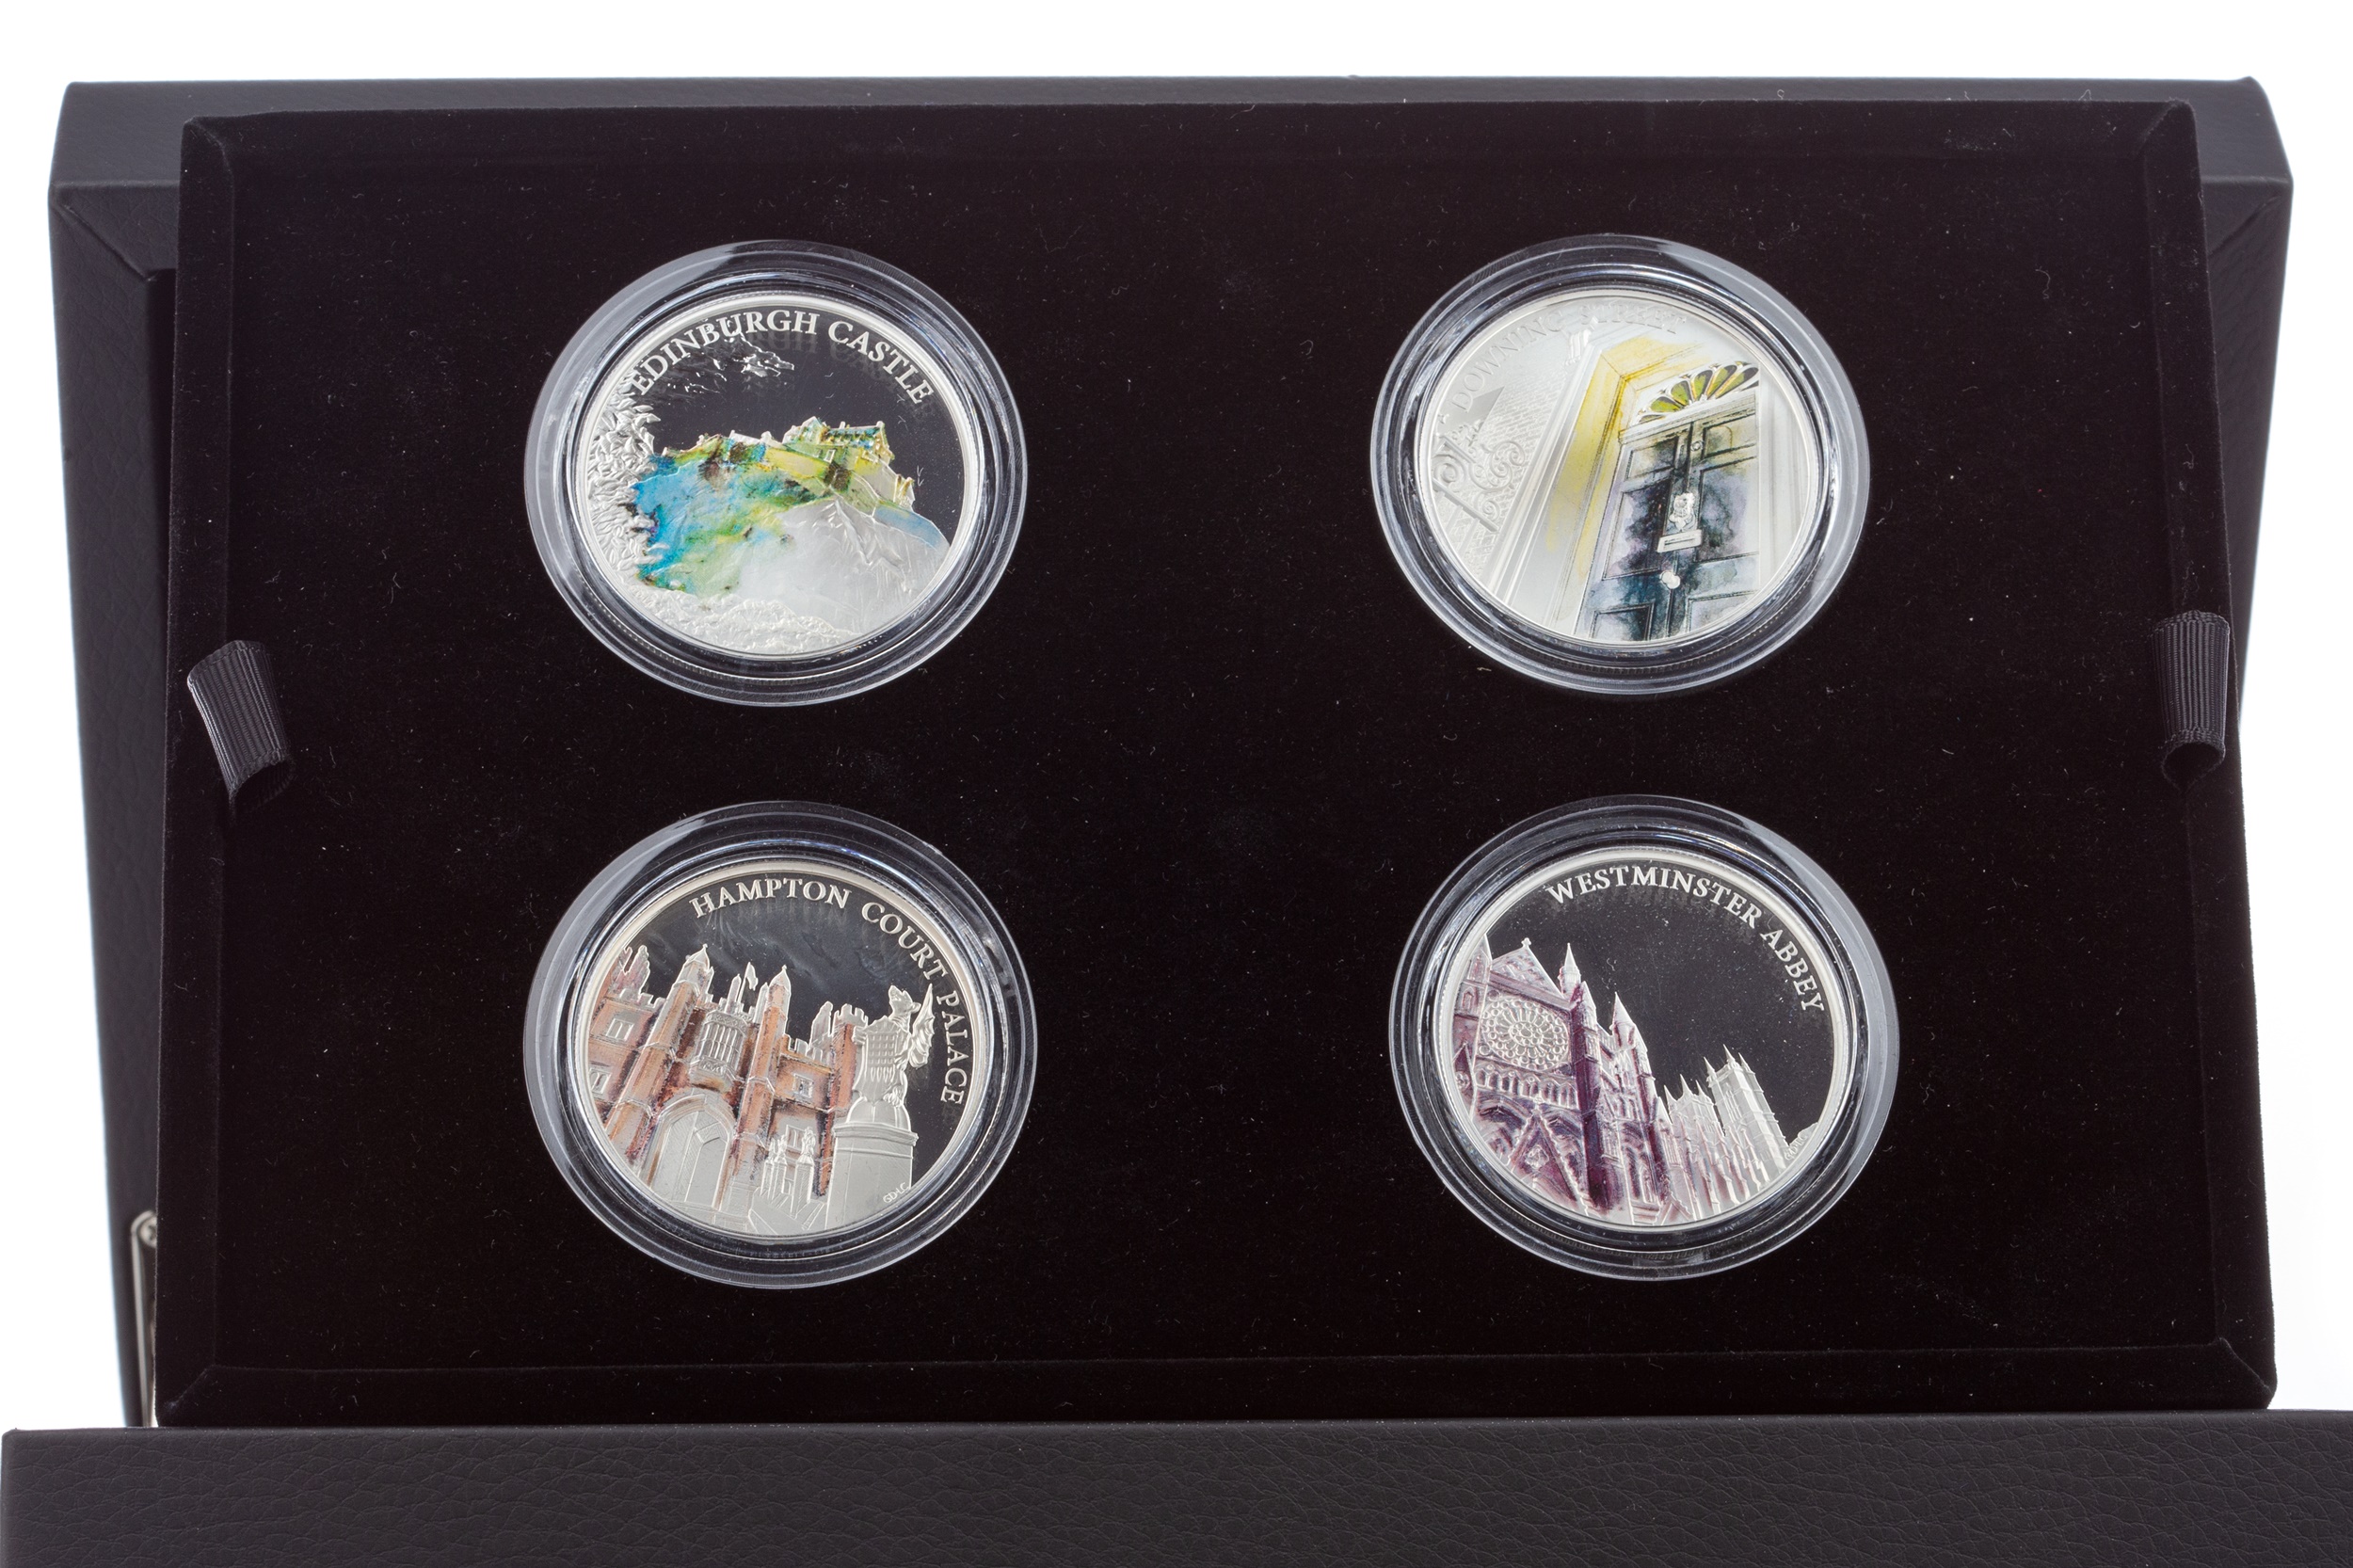 THE 2017 ROYAL MINT UK 'PORTRAIT OF BRITAIN' COIN COLLECTION